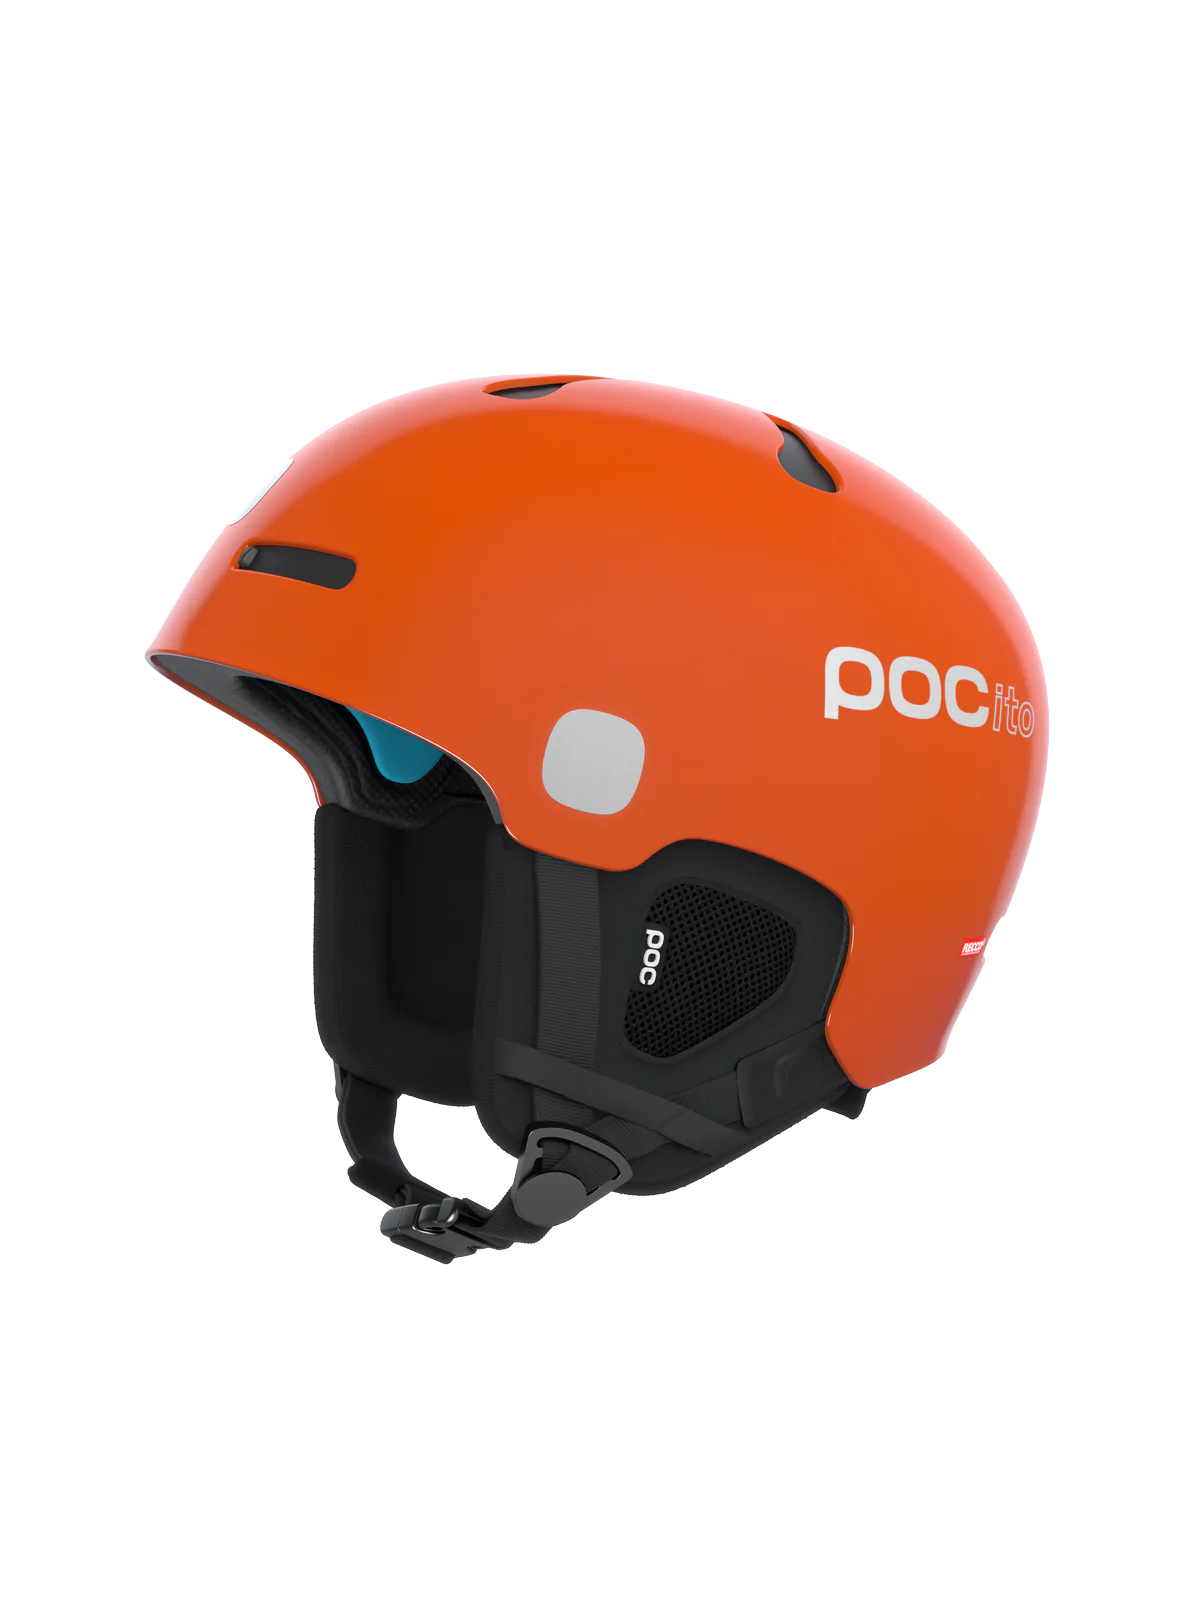 a8e21f106f2b202b0d23186b8a8e383b3da93e4e_10498_9050_KASK_NARCIARSKI_POC_POCITO_AURIC_CUT_SPIN__4_1024x1024@2x